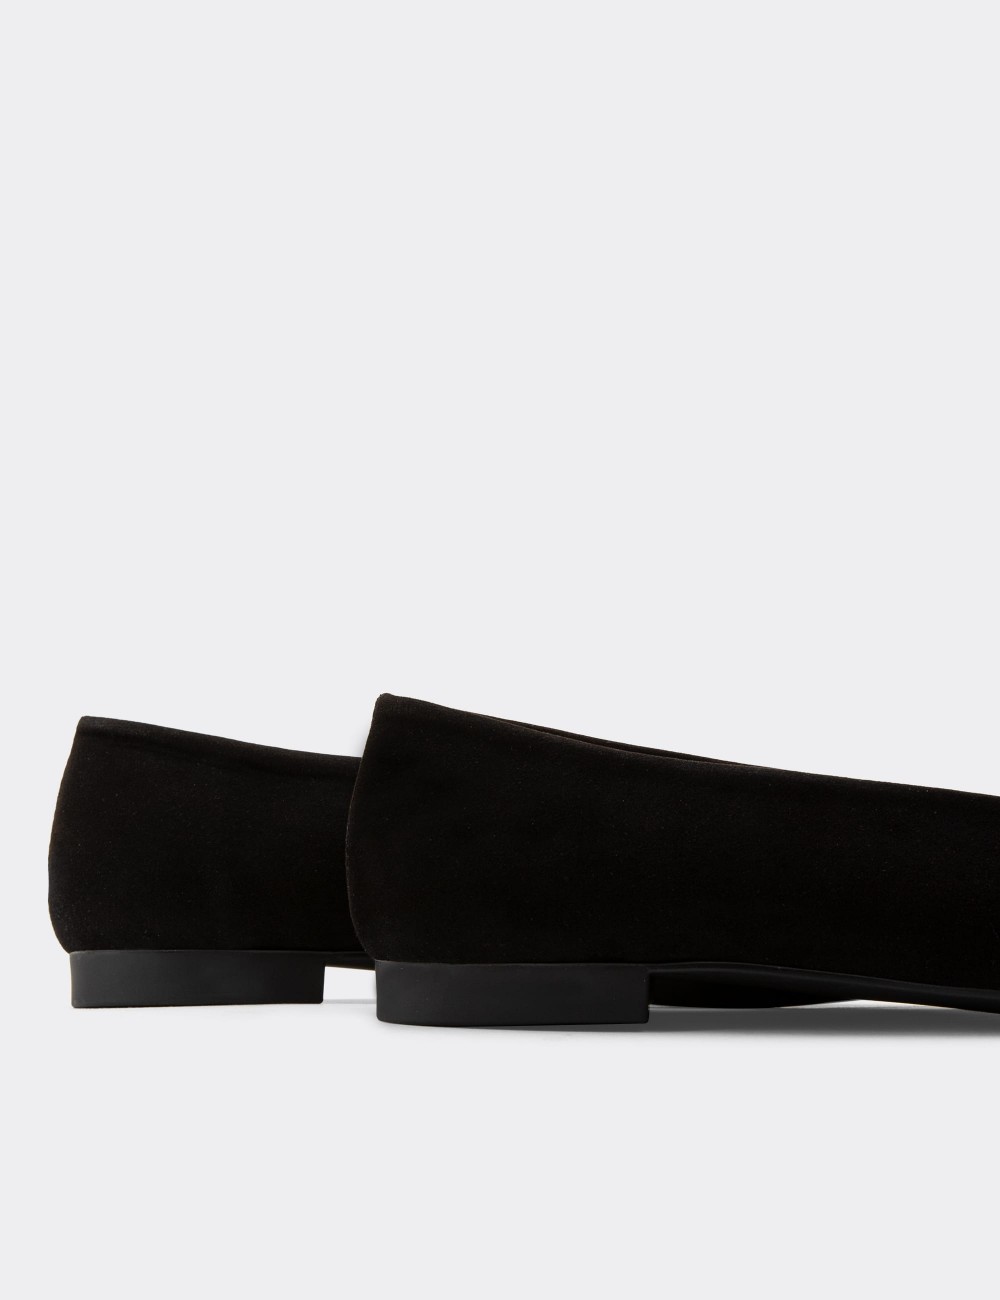 Black Suede Leather Loafers - 01911ZSYHC01